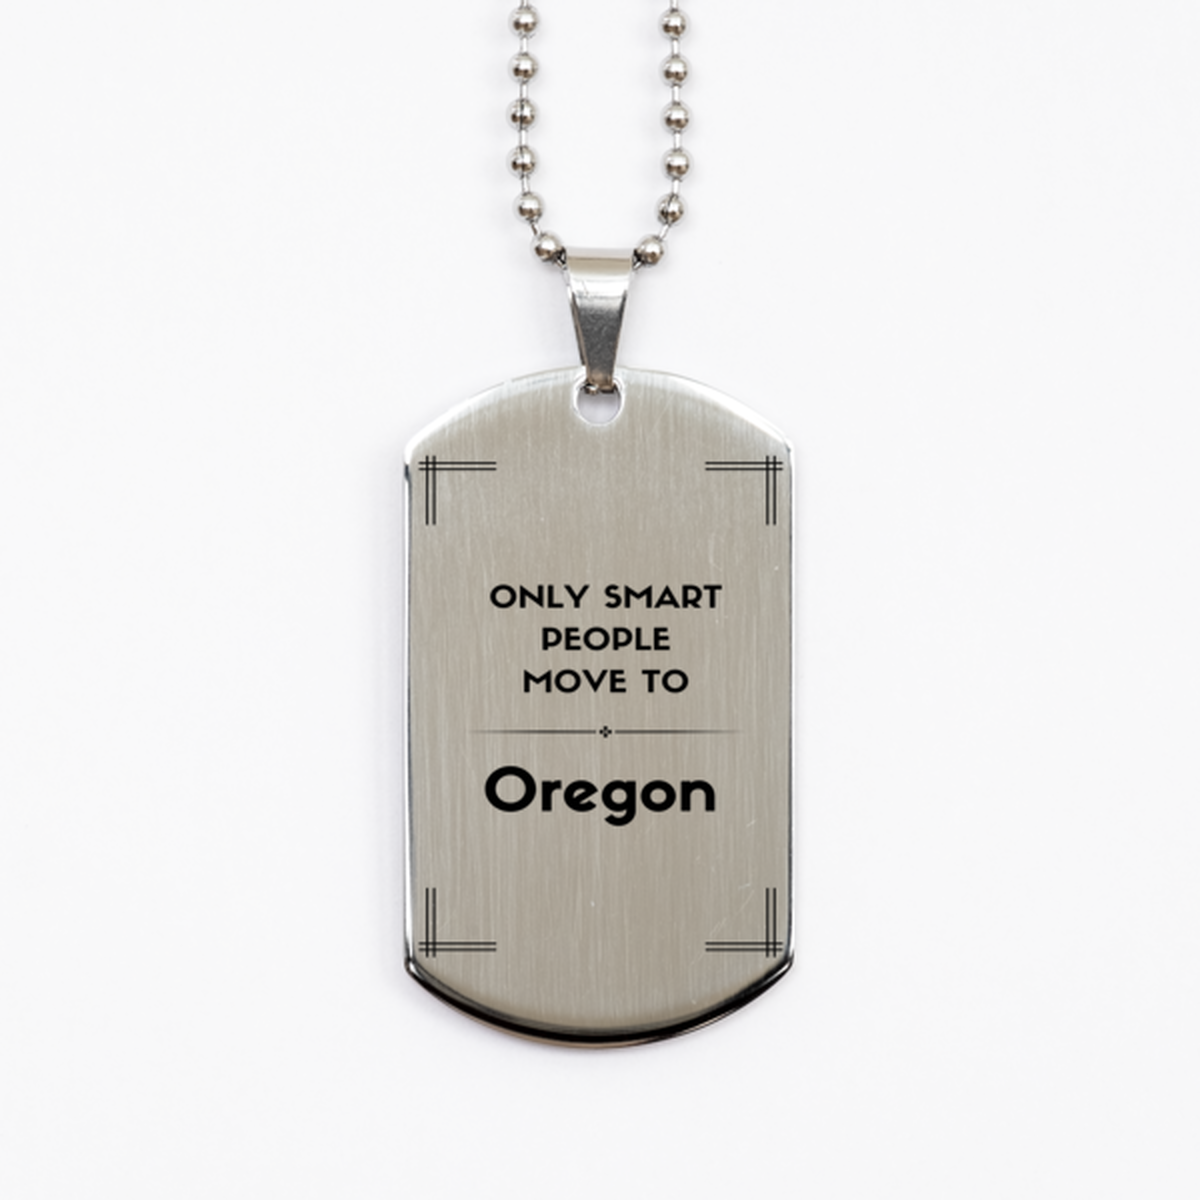 Only smart people move to Oregon Silver Dog Tag, Gag Gifts For Oregon, Move to Oregon Gifts for Friends Coworker Funny Saying Quote